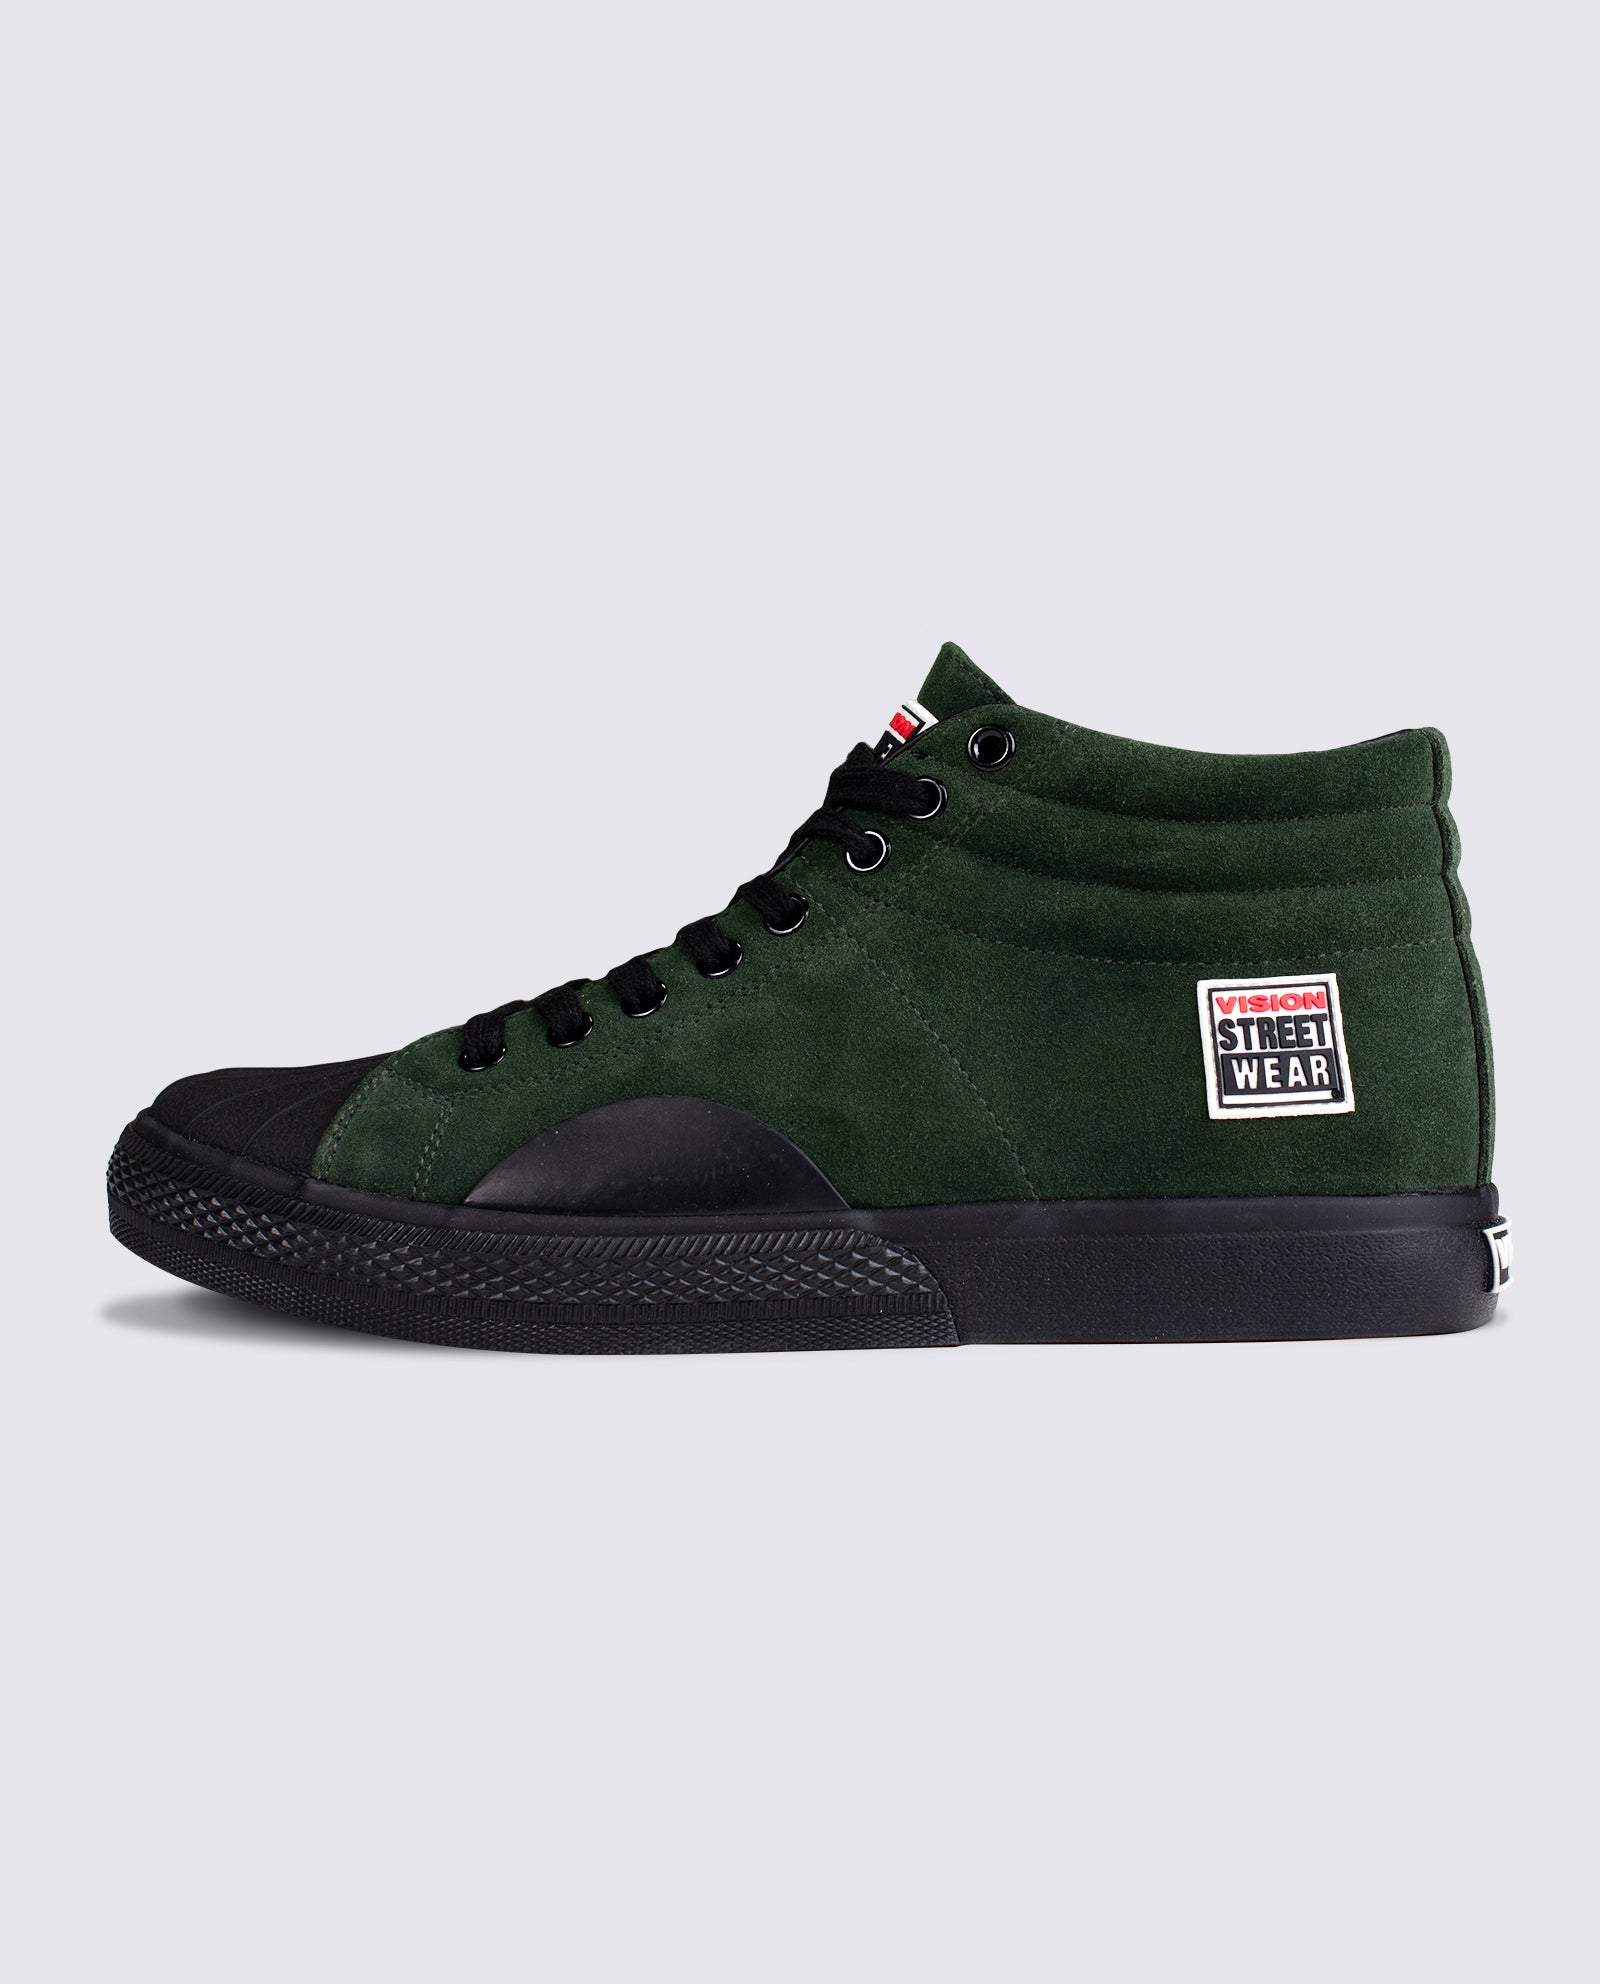 Vision Street Wear Leather Suede High Top Skateboard Sneakers Army